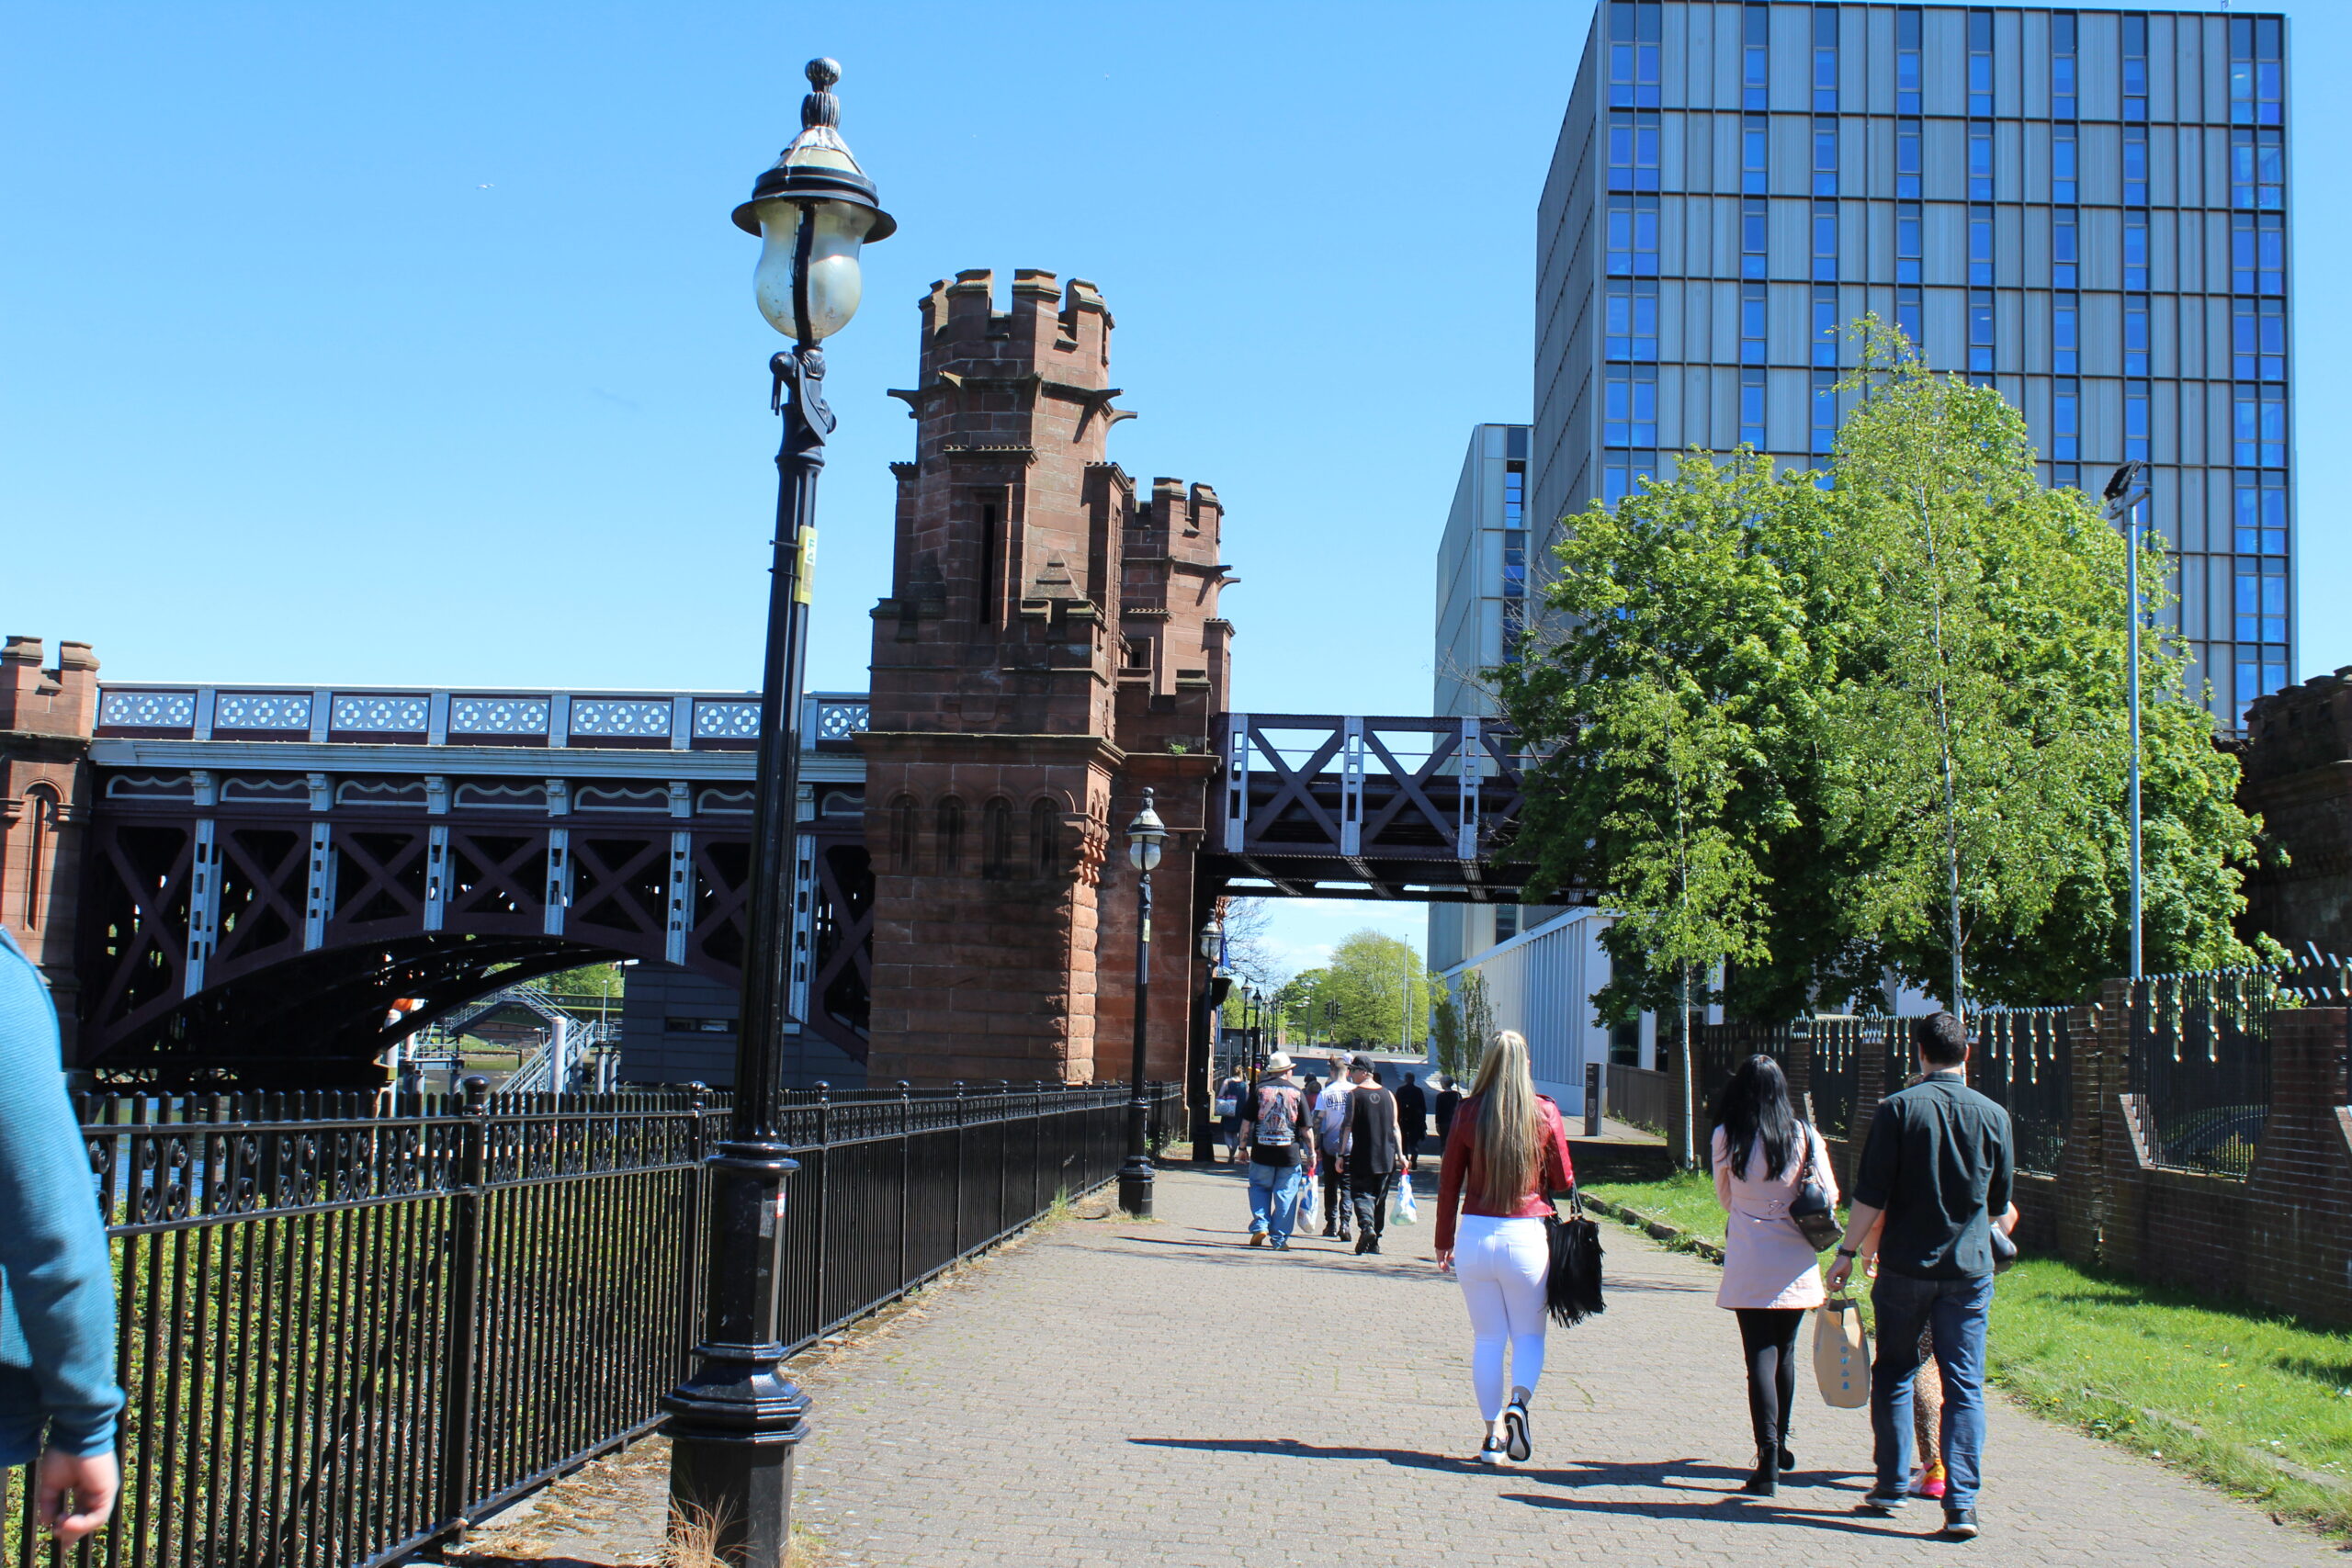 It’s a sunny day with a cloudless blue sky. People are strolling along a walkway by the side of the river Clyde. There is a bridge and tower block in the background.